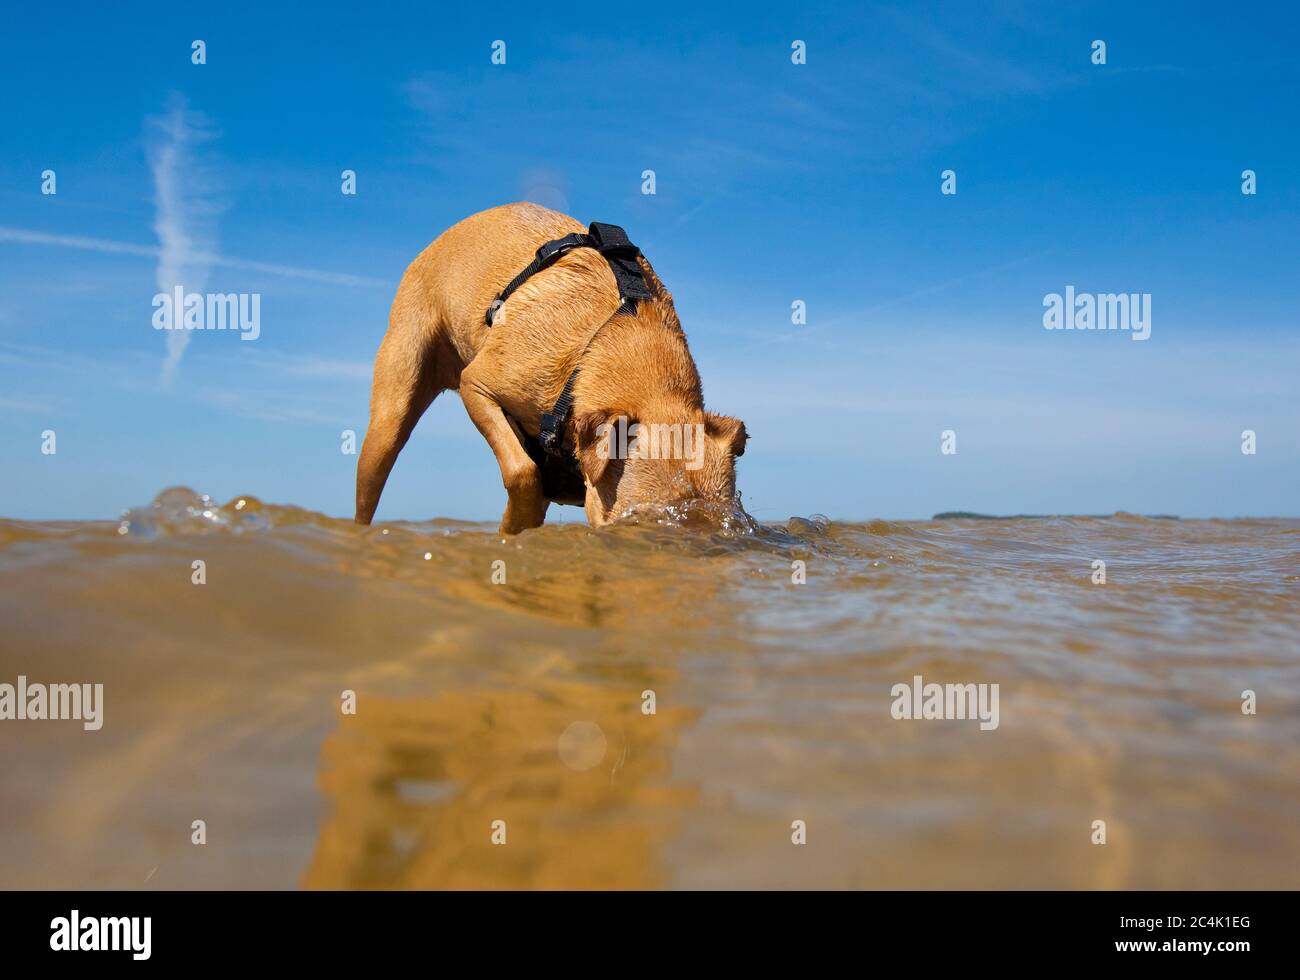 Dog standing in the water with its head underwater Stock Photo